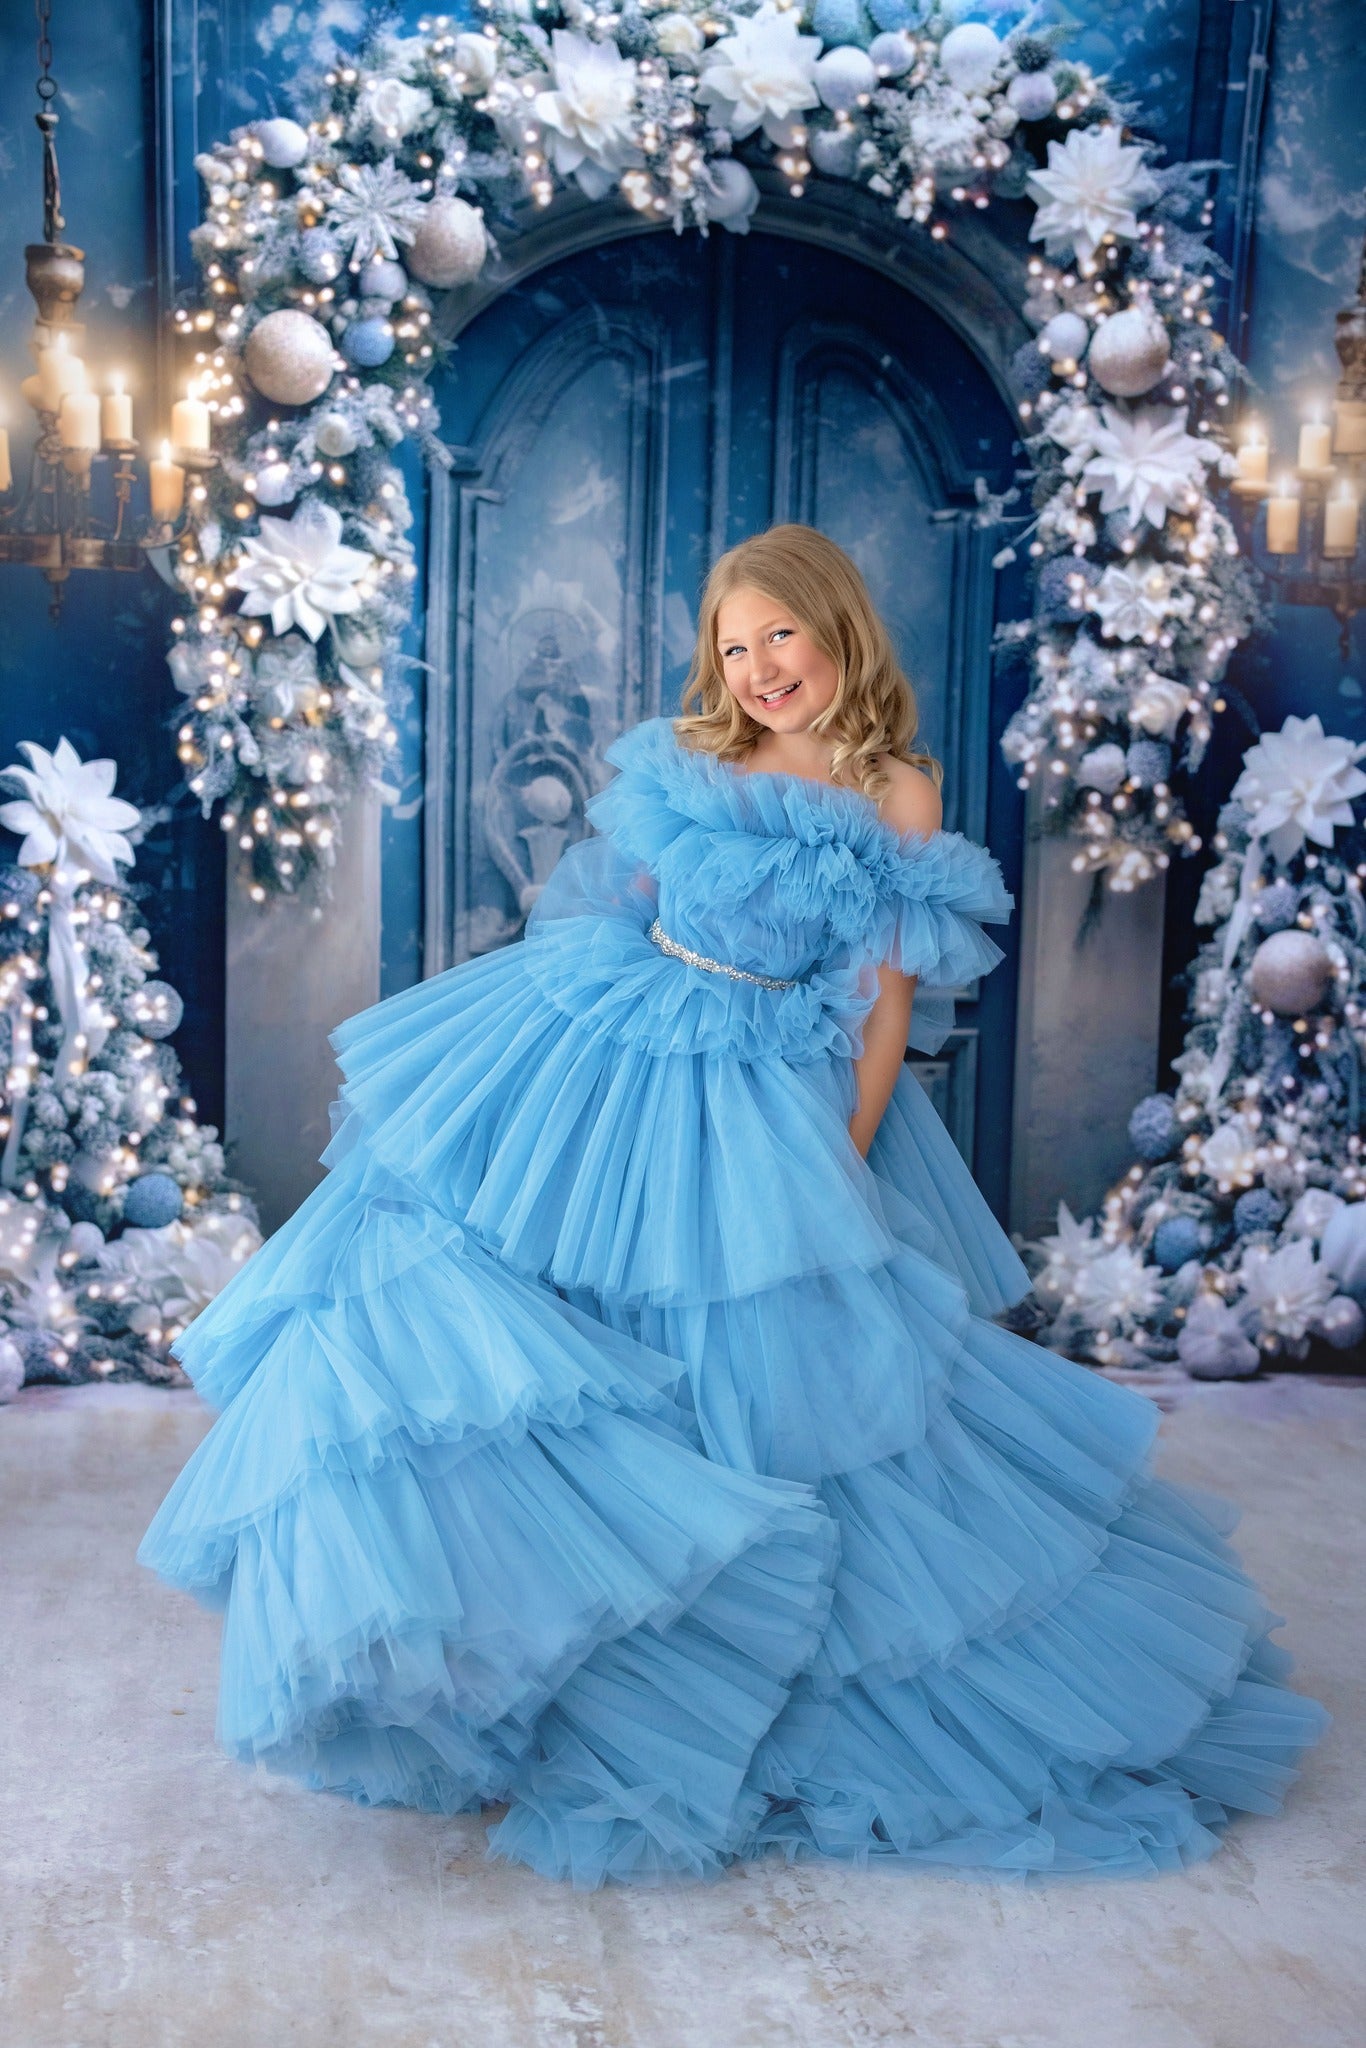 blue gowns, sister dresses, matching dresses, holiday gowns, dream dress sessions, photography christmas sessions, gowns for photography. children's rental gowns, barbie inspired gowns, barbie inspired dress